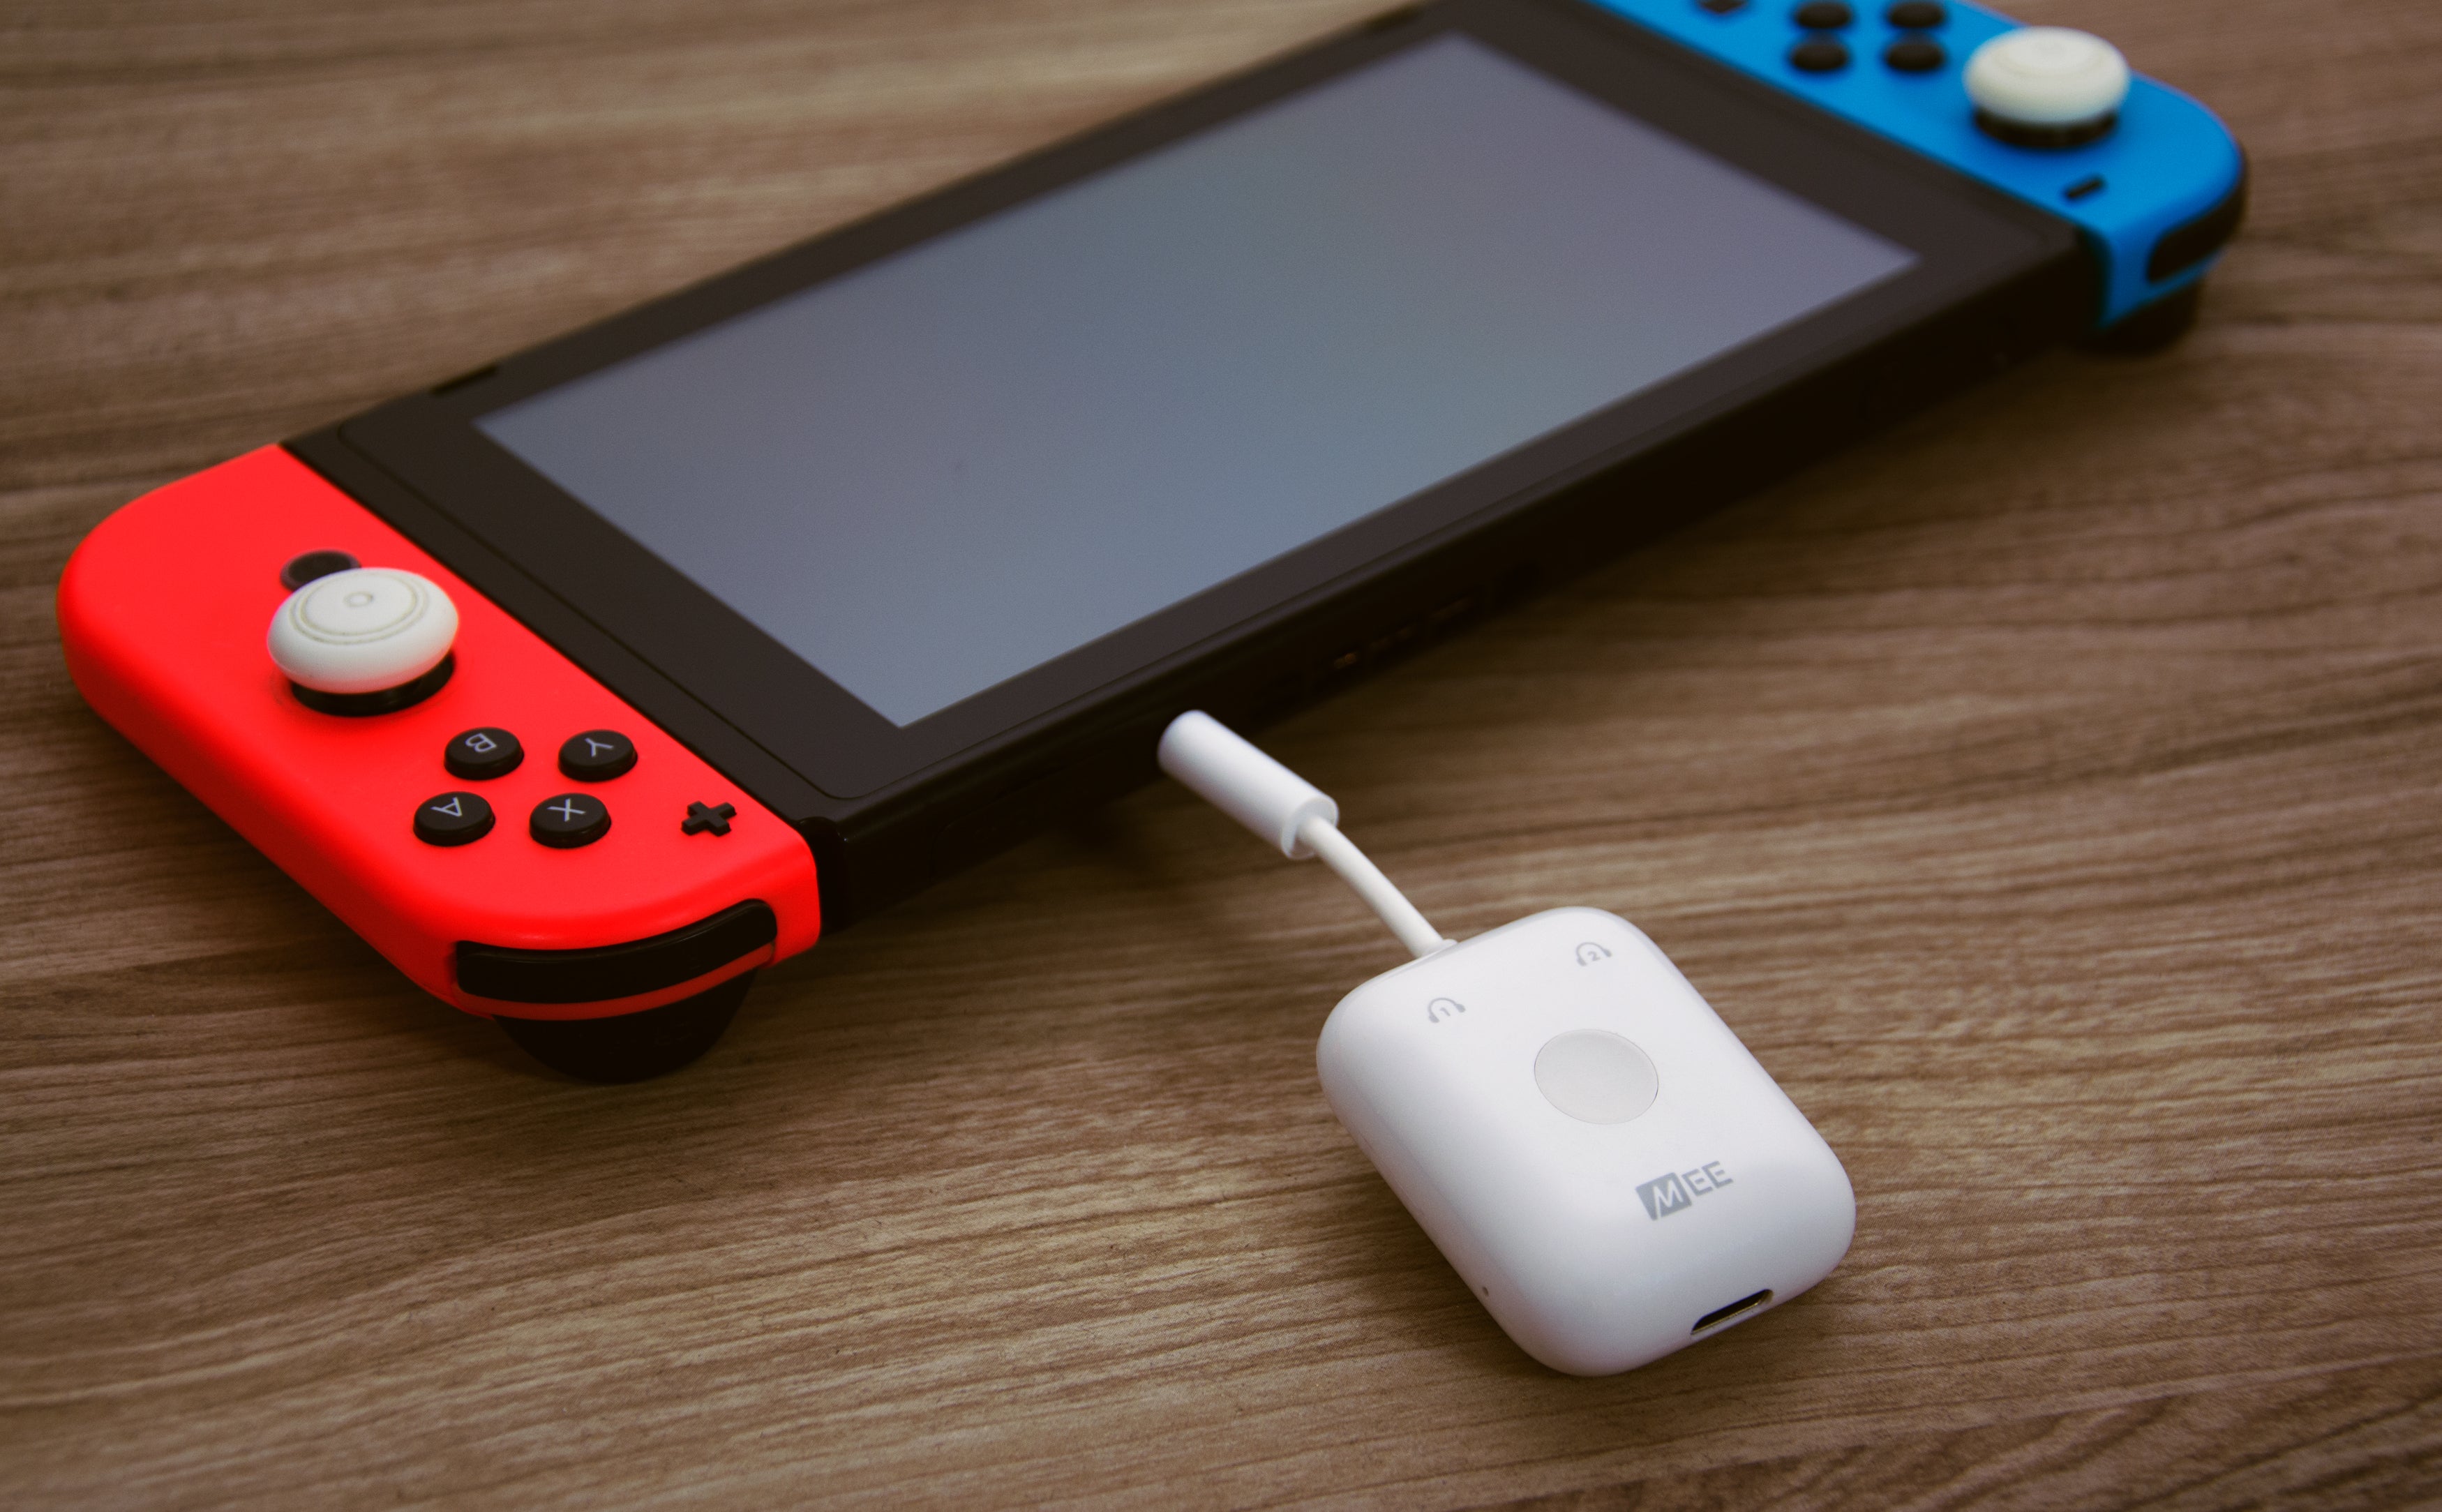 A nintendo switch with red and blue controllers connected, lying on a wooden surface next to a white usb-c audio transmitter.